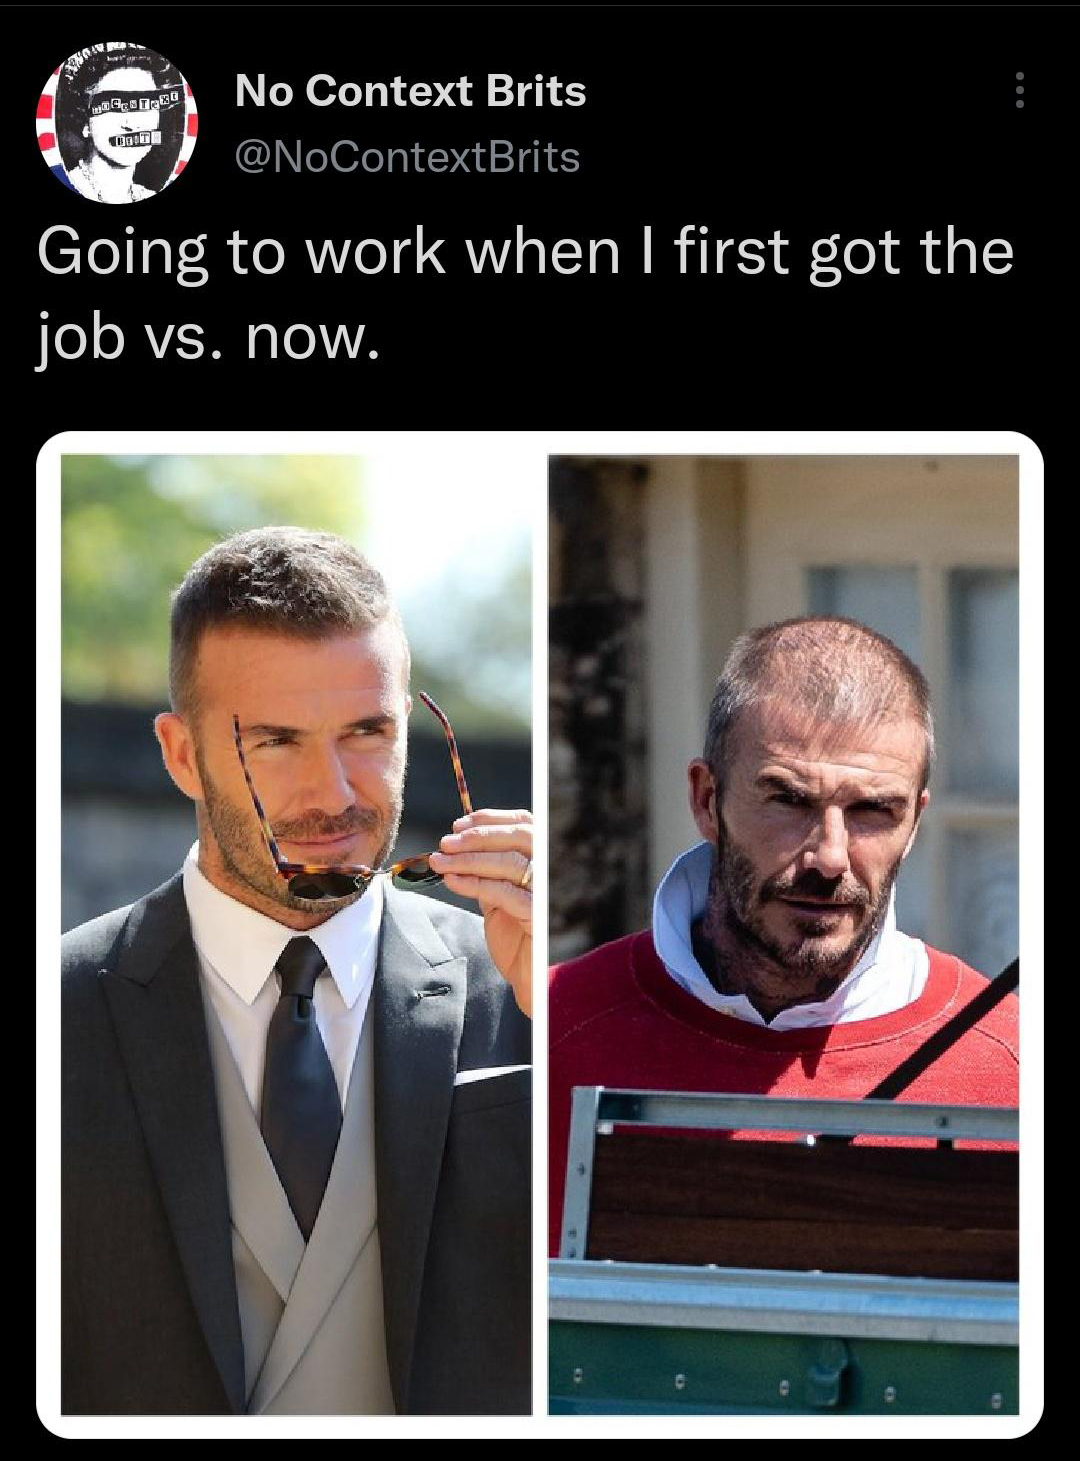 Funny Tweets - david beckham Going to work when I first got the job vs. now.